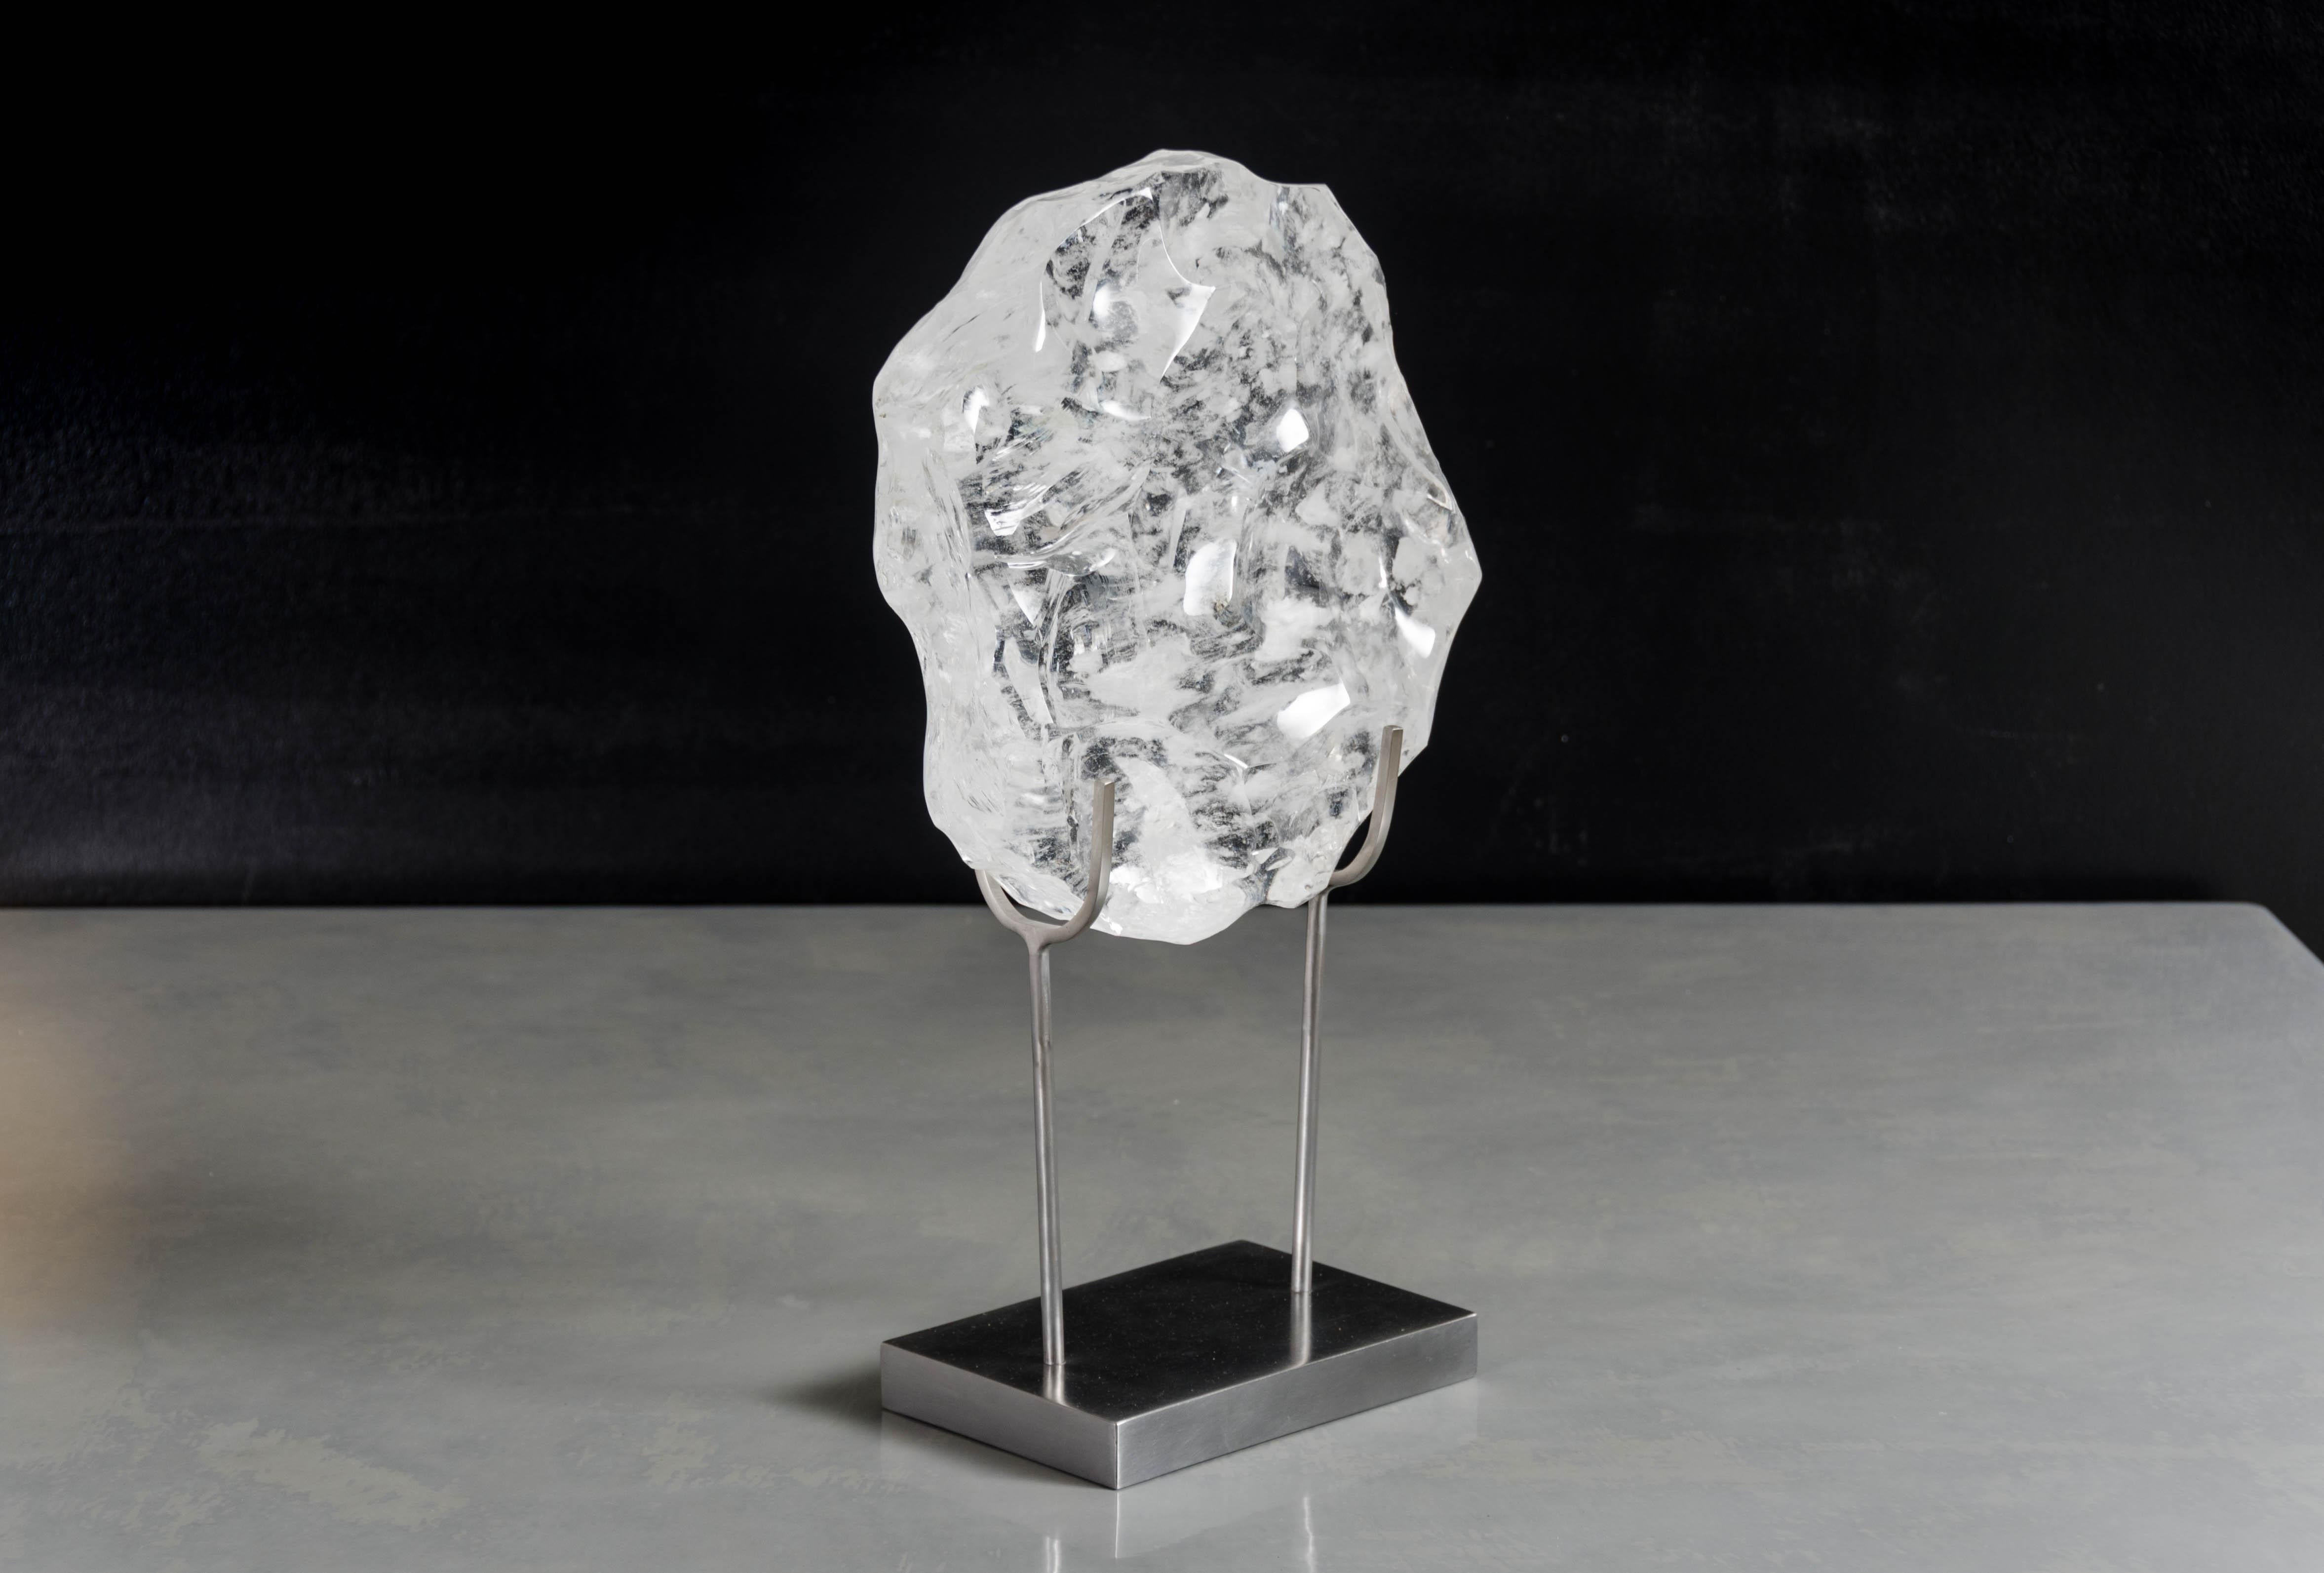 Bi Sculpture on steel stand (medium)
Crystal
Hand carved
Steel
Contemporary sculpture
Limited edition

Crystal shapes and inclusions vary.
 